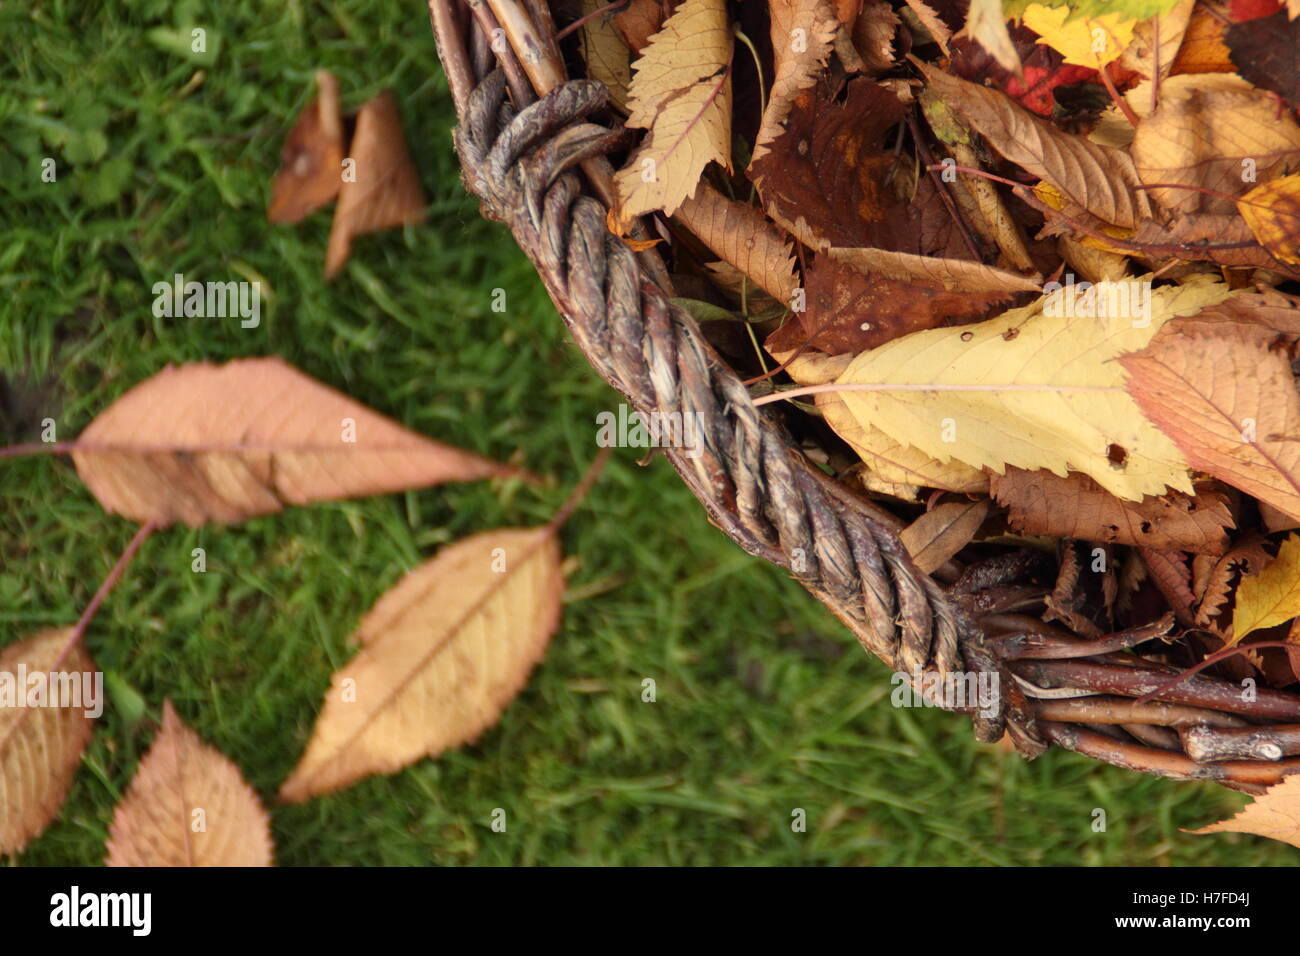 Raked leaves from an ornamental cherry tree (prunus) are cleared from a garden lawn into a wicker basket on a bright October day Stock Photo